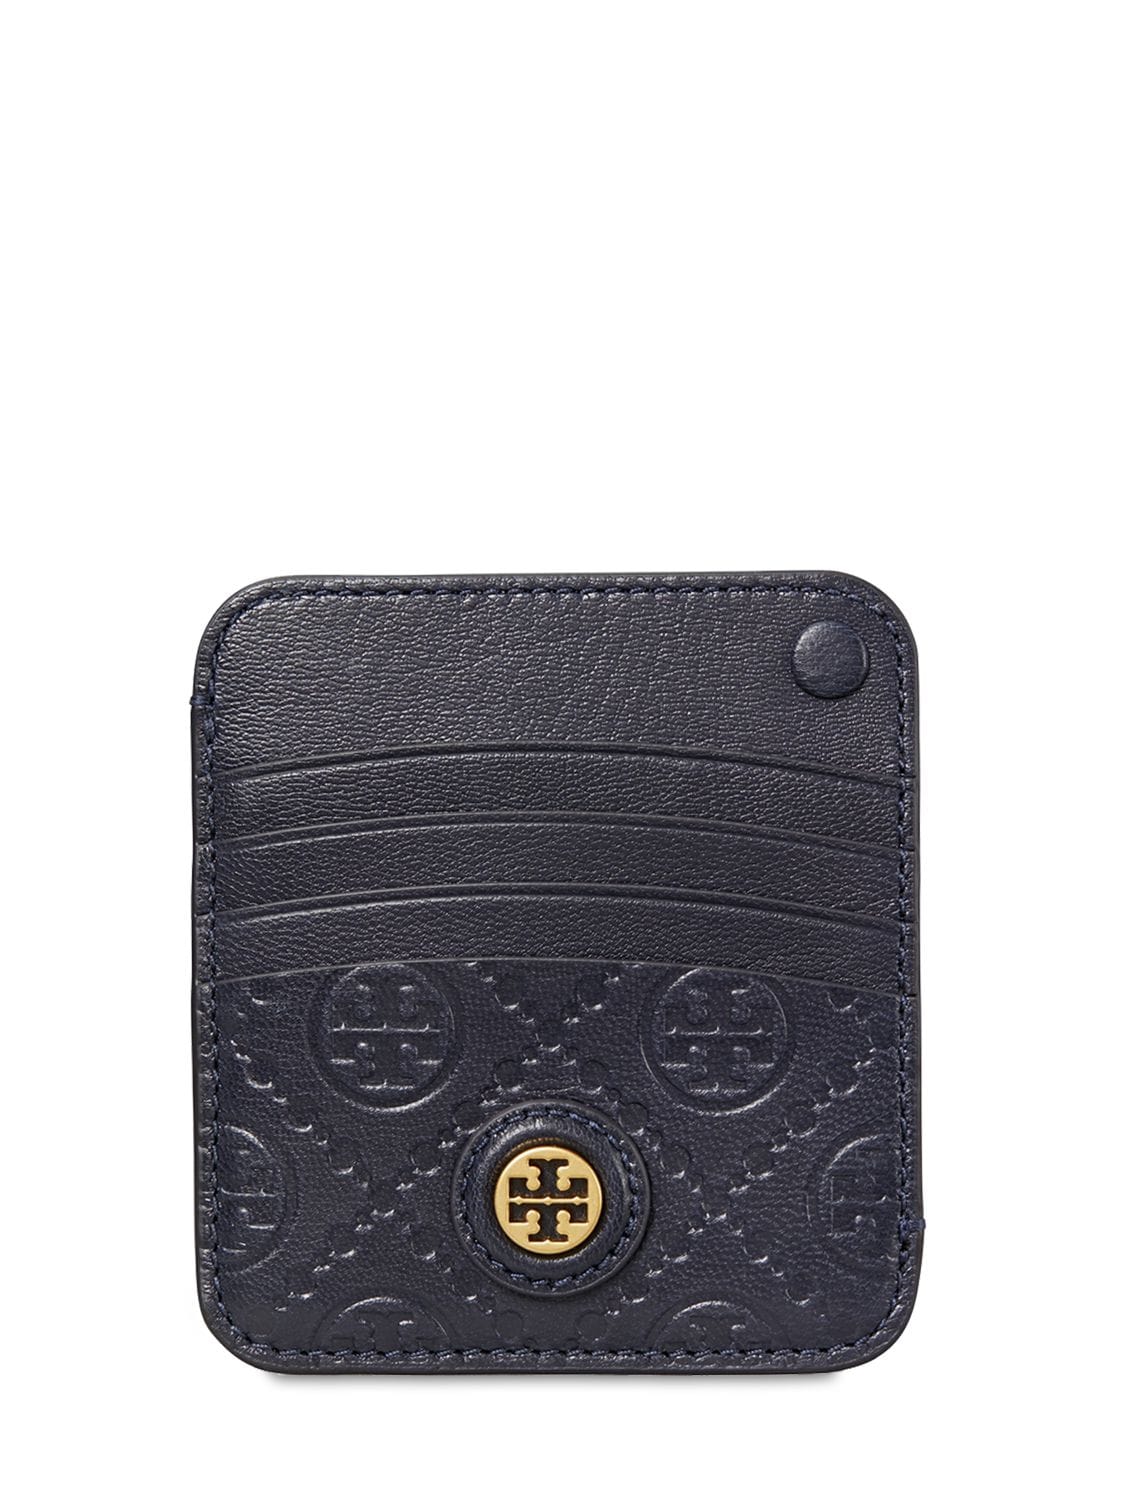 Tory Burch T Monogram Leather Card Holder In Midnight